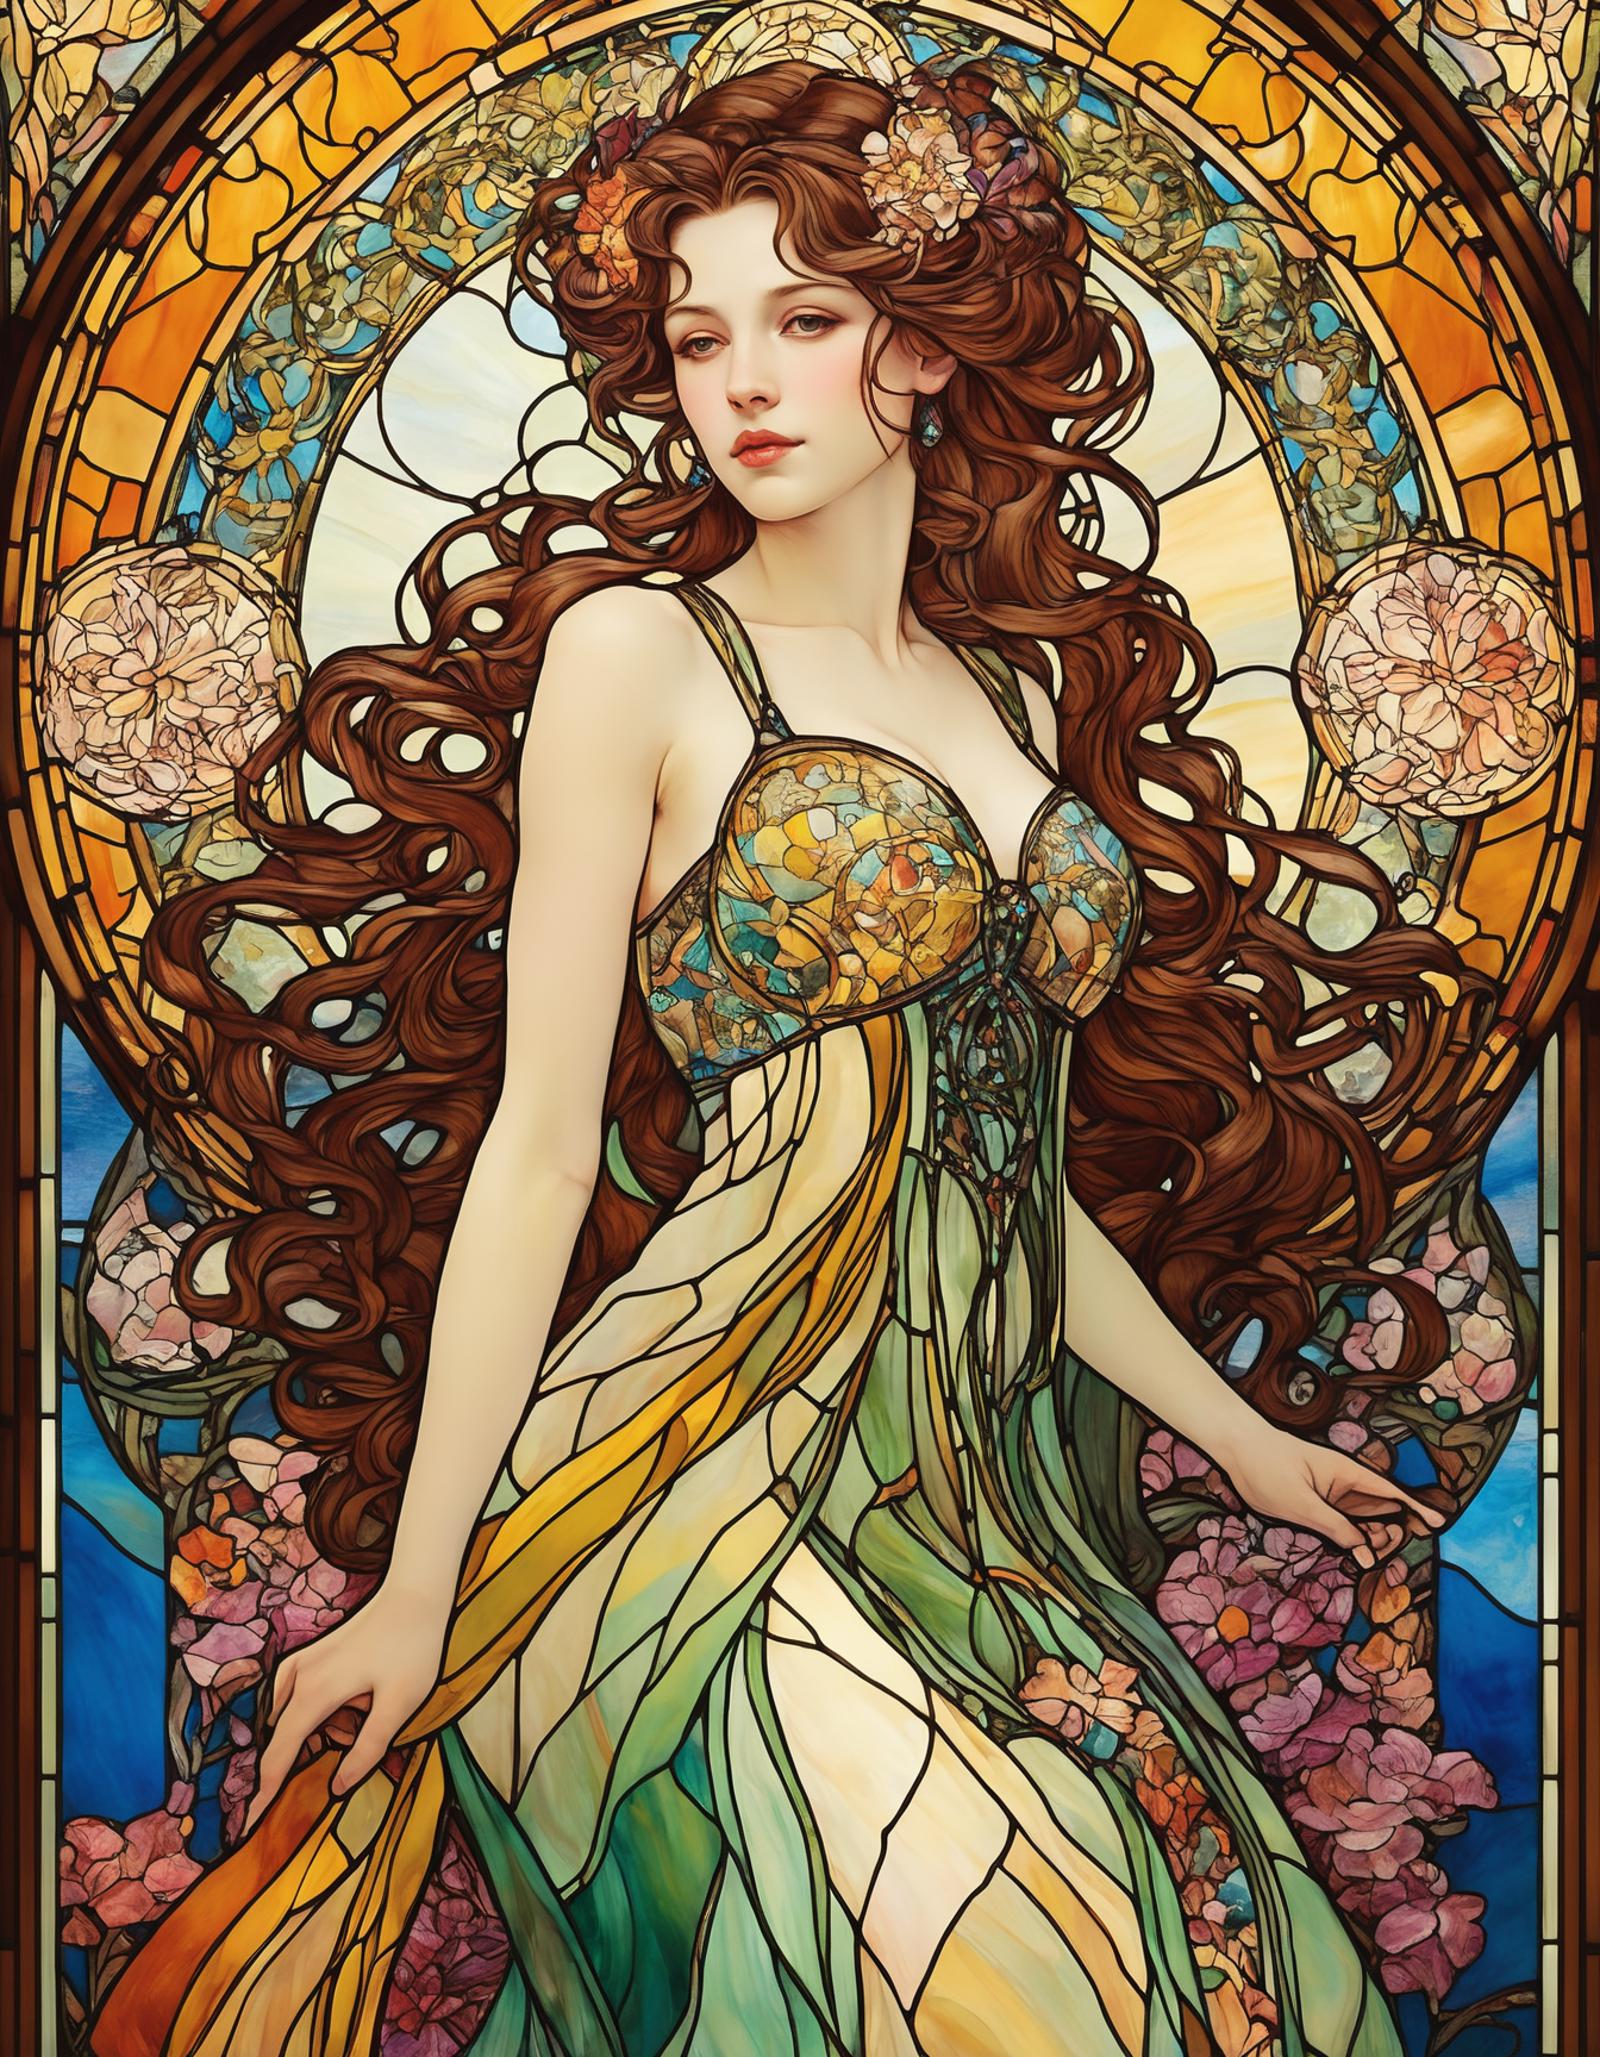 A stained glass depiction of a woman in a dress with long hair, flowers, and a blue top.